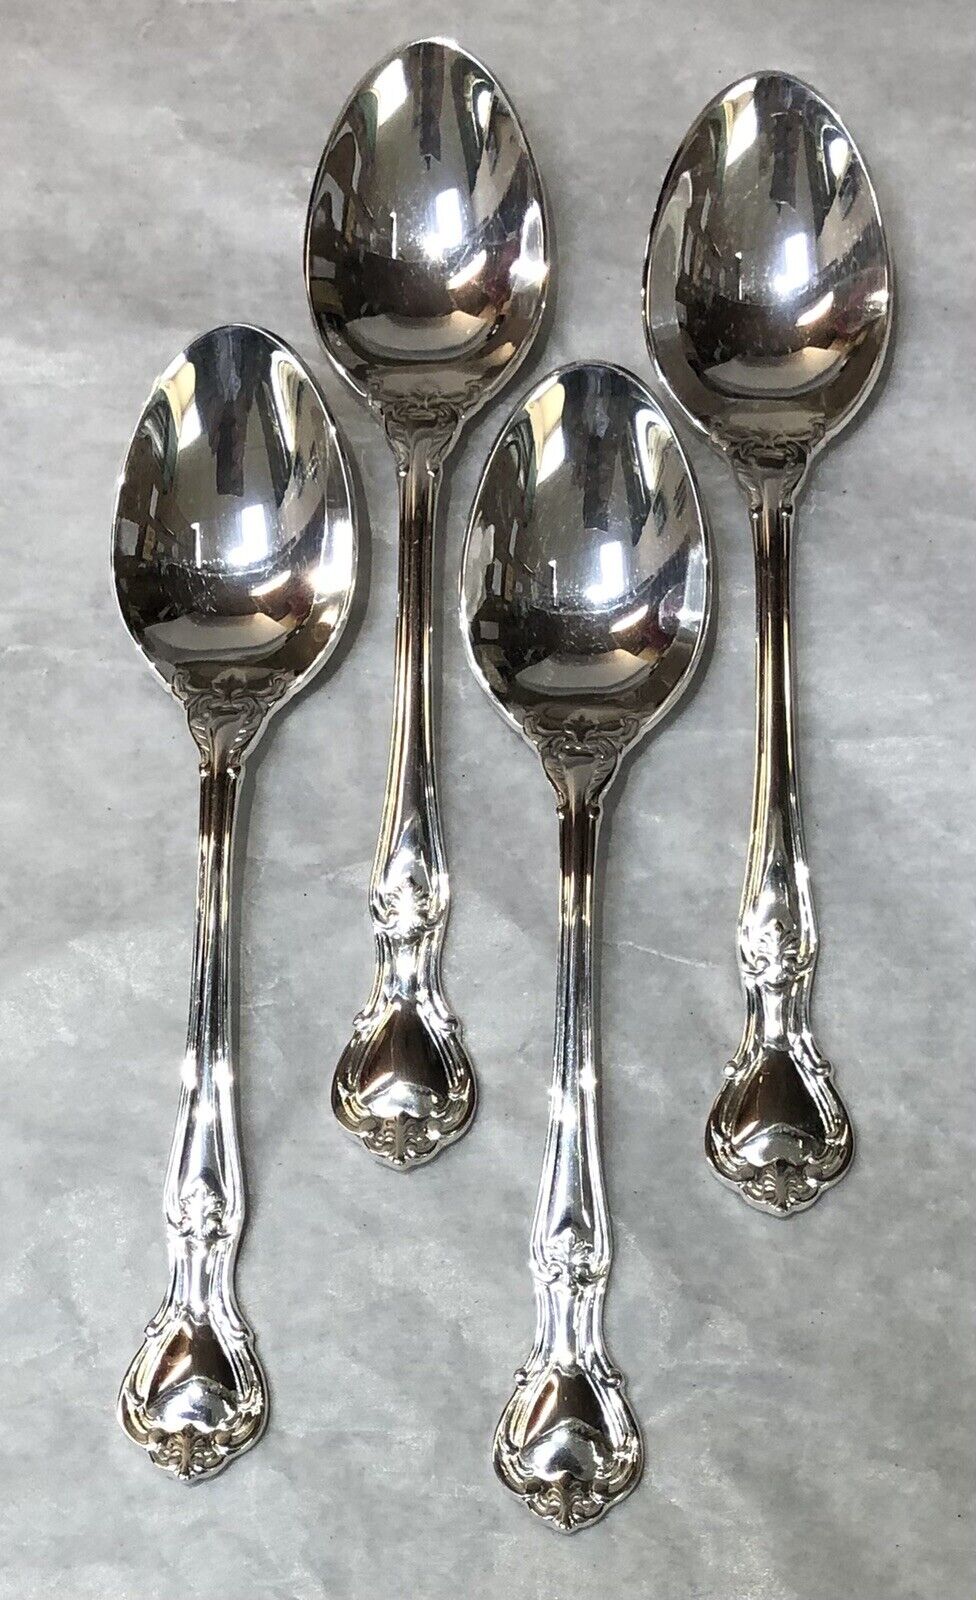 REED and BARTON Rathmore Silverplate Teaspoon (set of 4 Spoons)